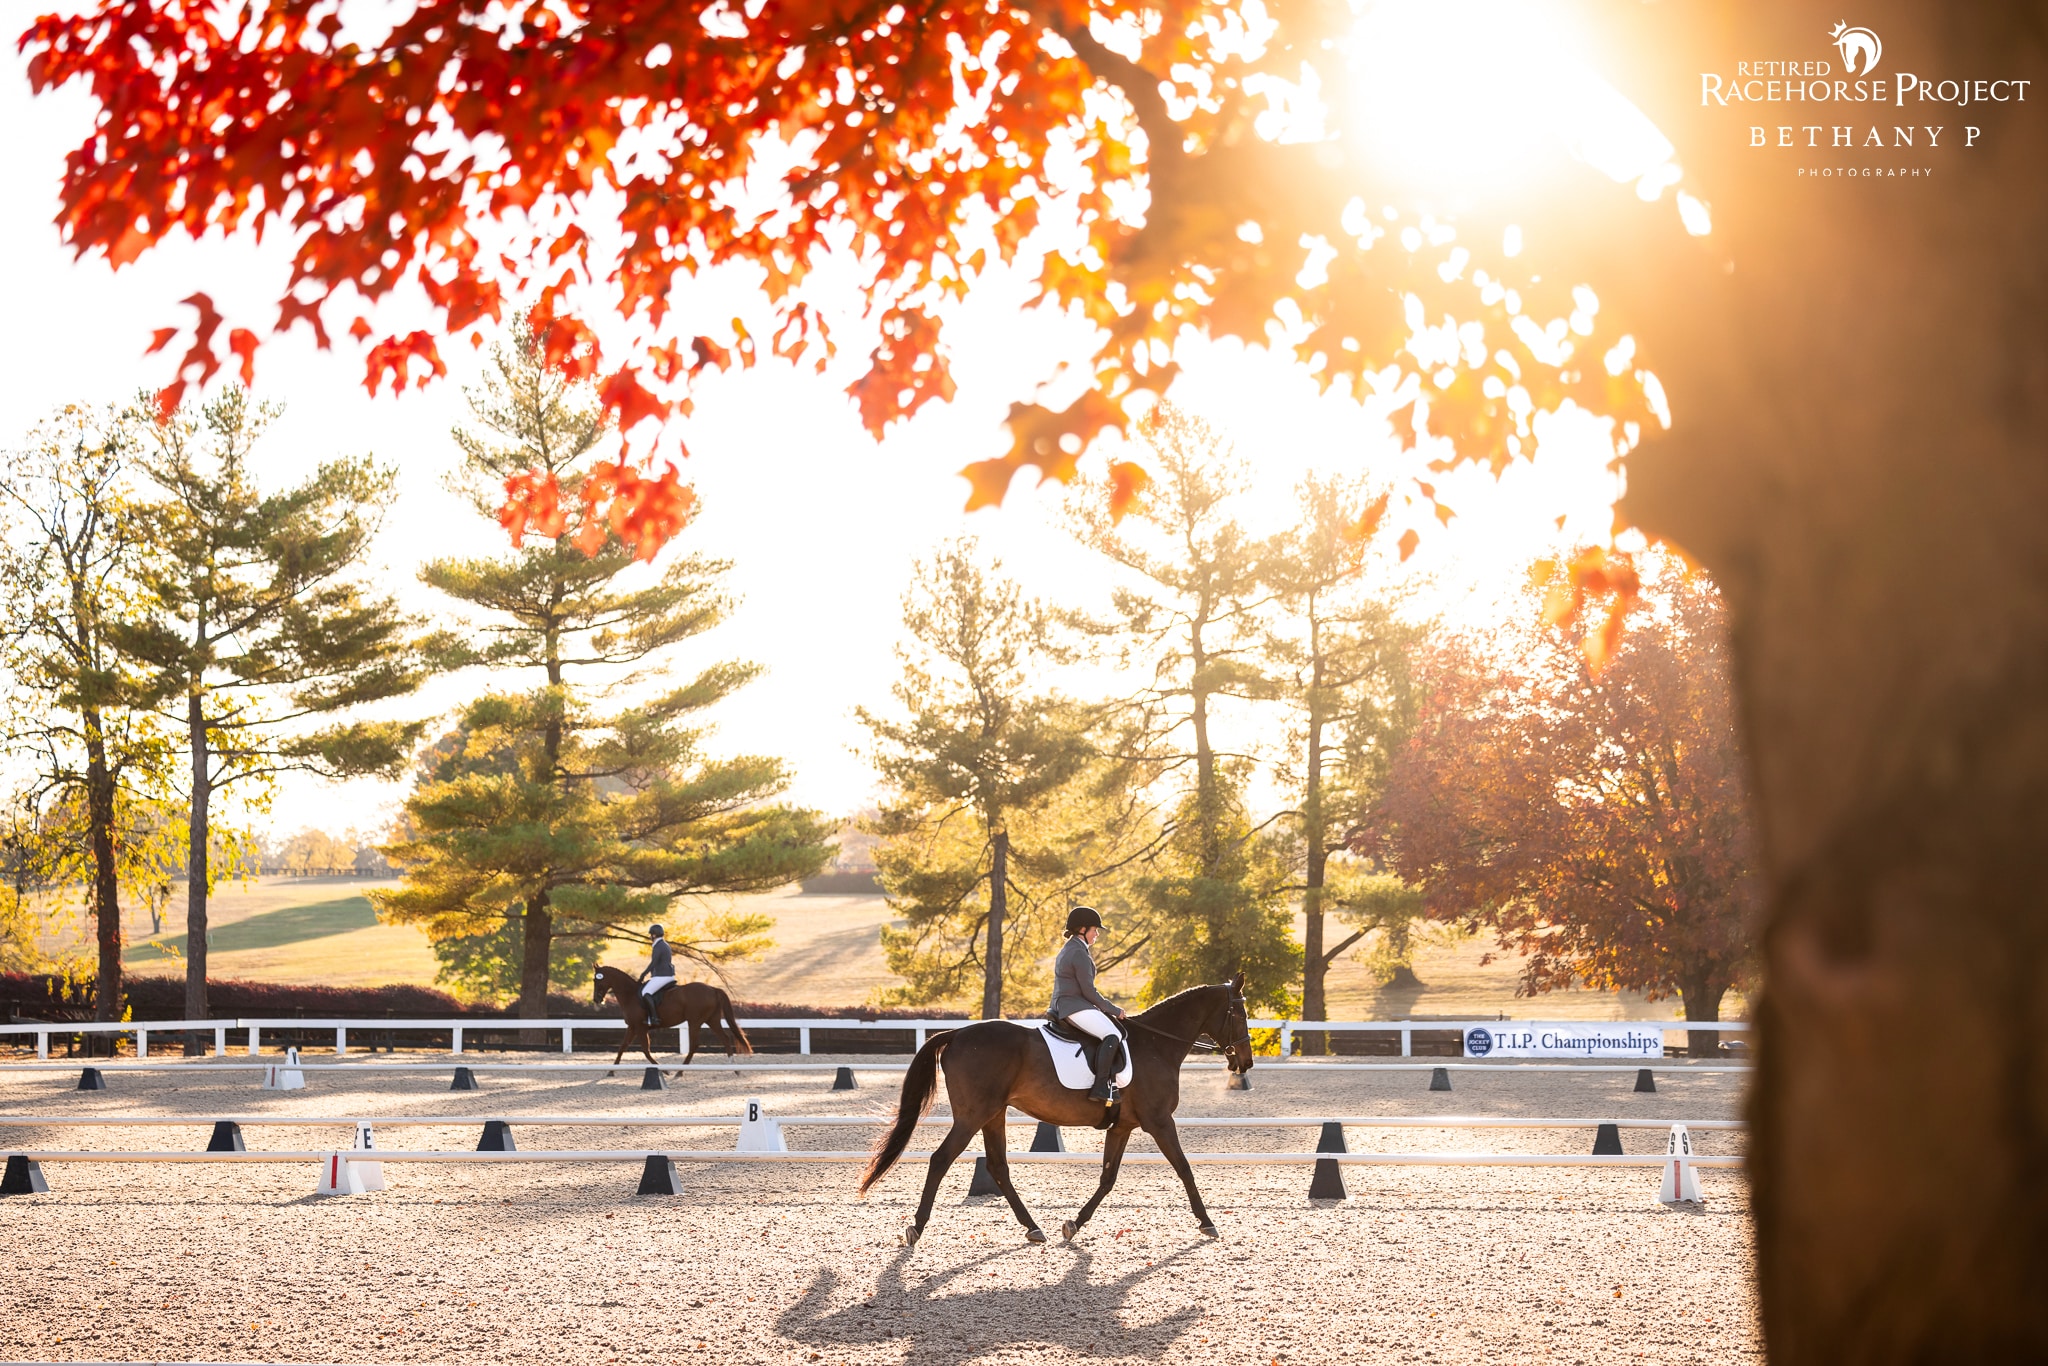 Featured image for “Education & Competition Continue at Thoroughbred Makeover & T.I.P. Championships”